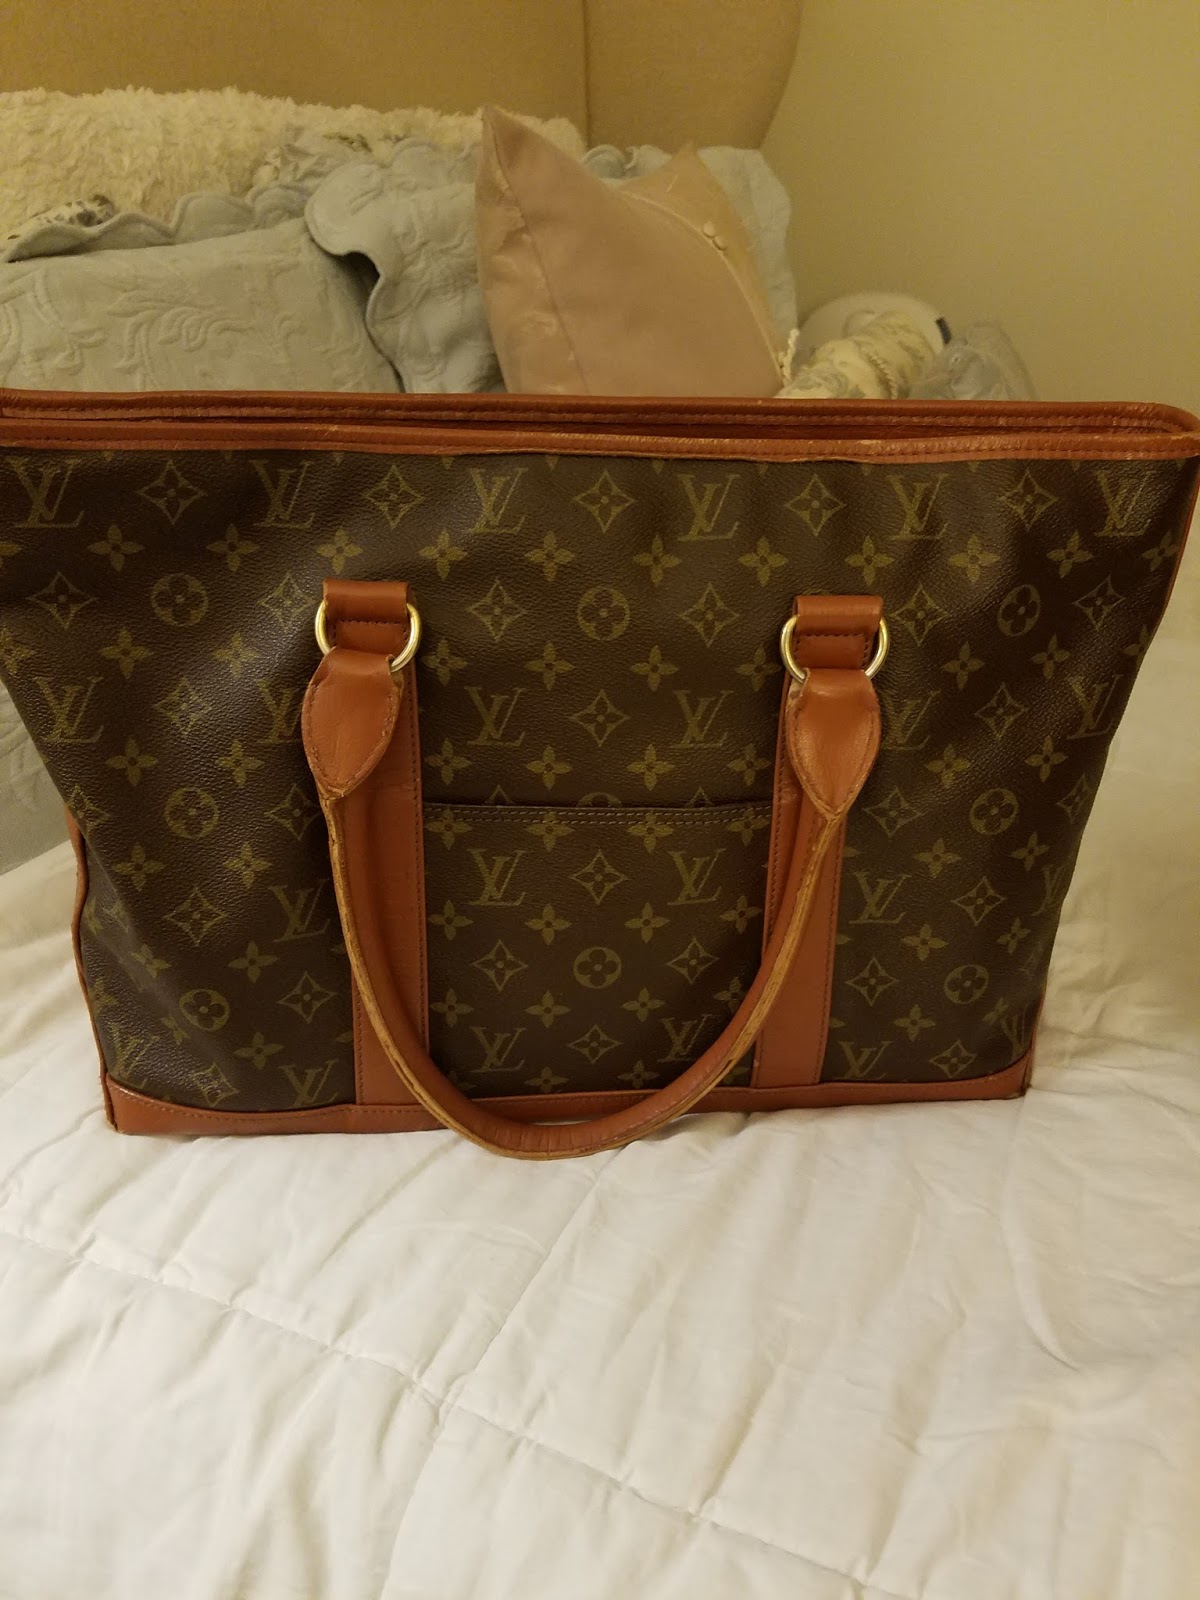 My Lv Collection : Louisvuitton